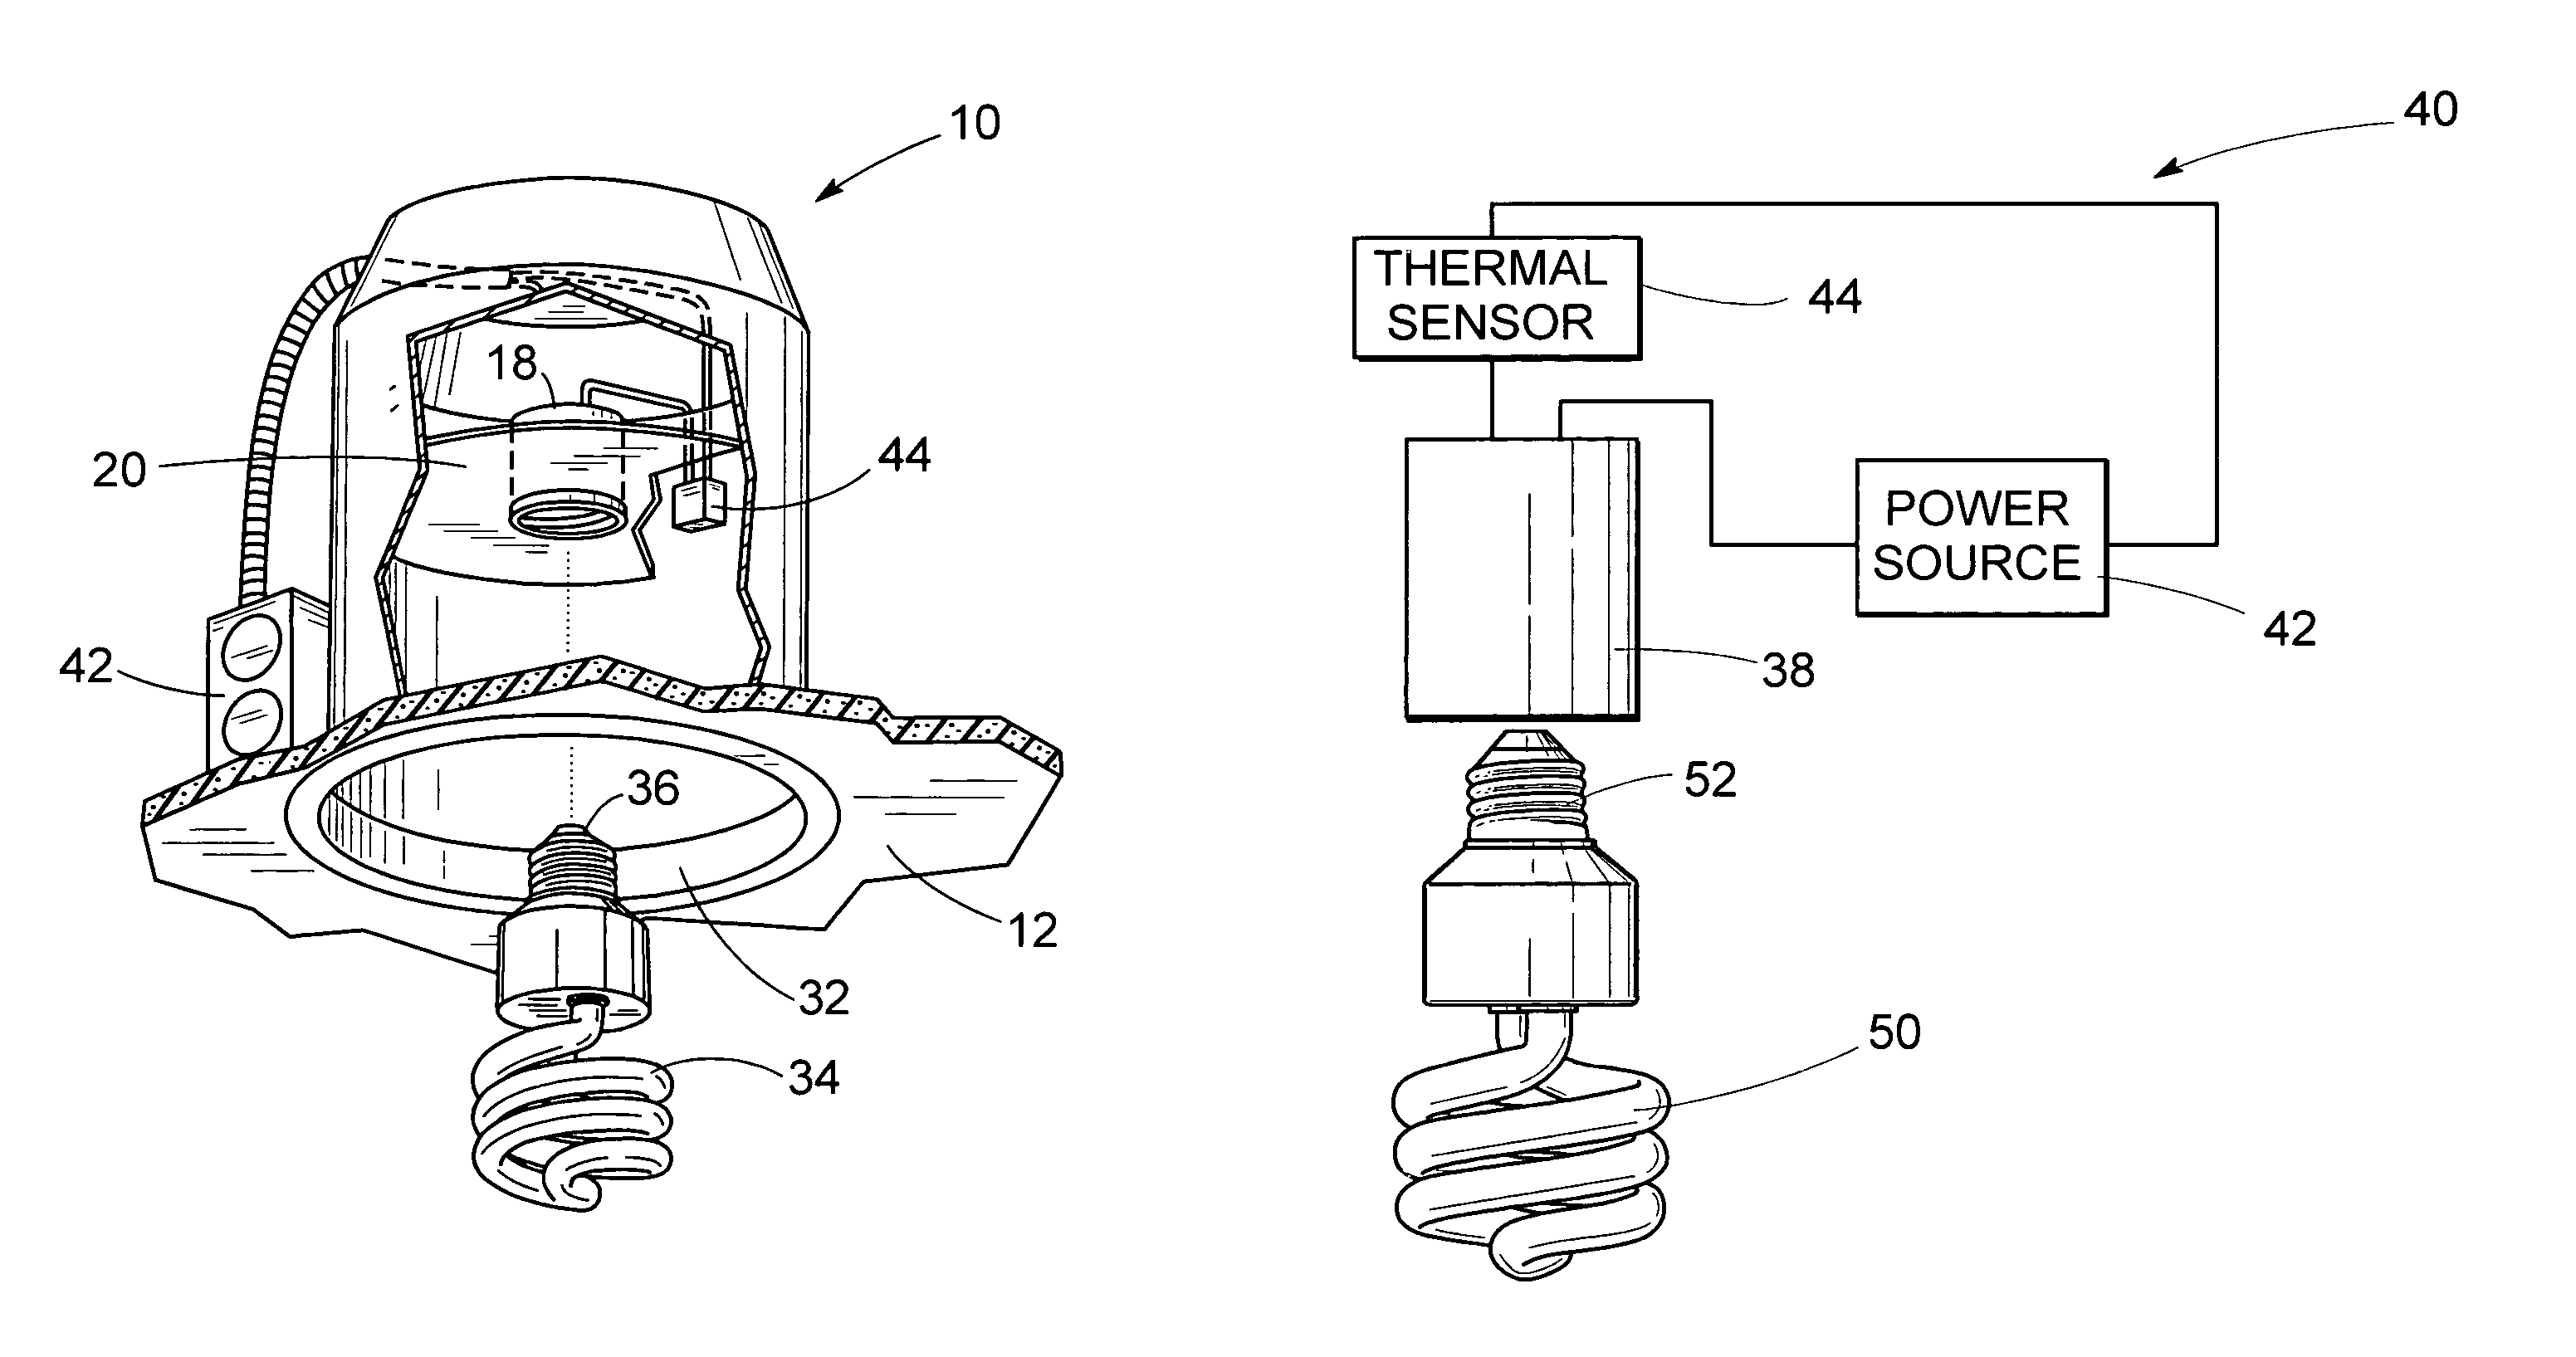 Method and apparatus for assuring compliance with high efficiency lighting standards